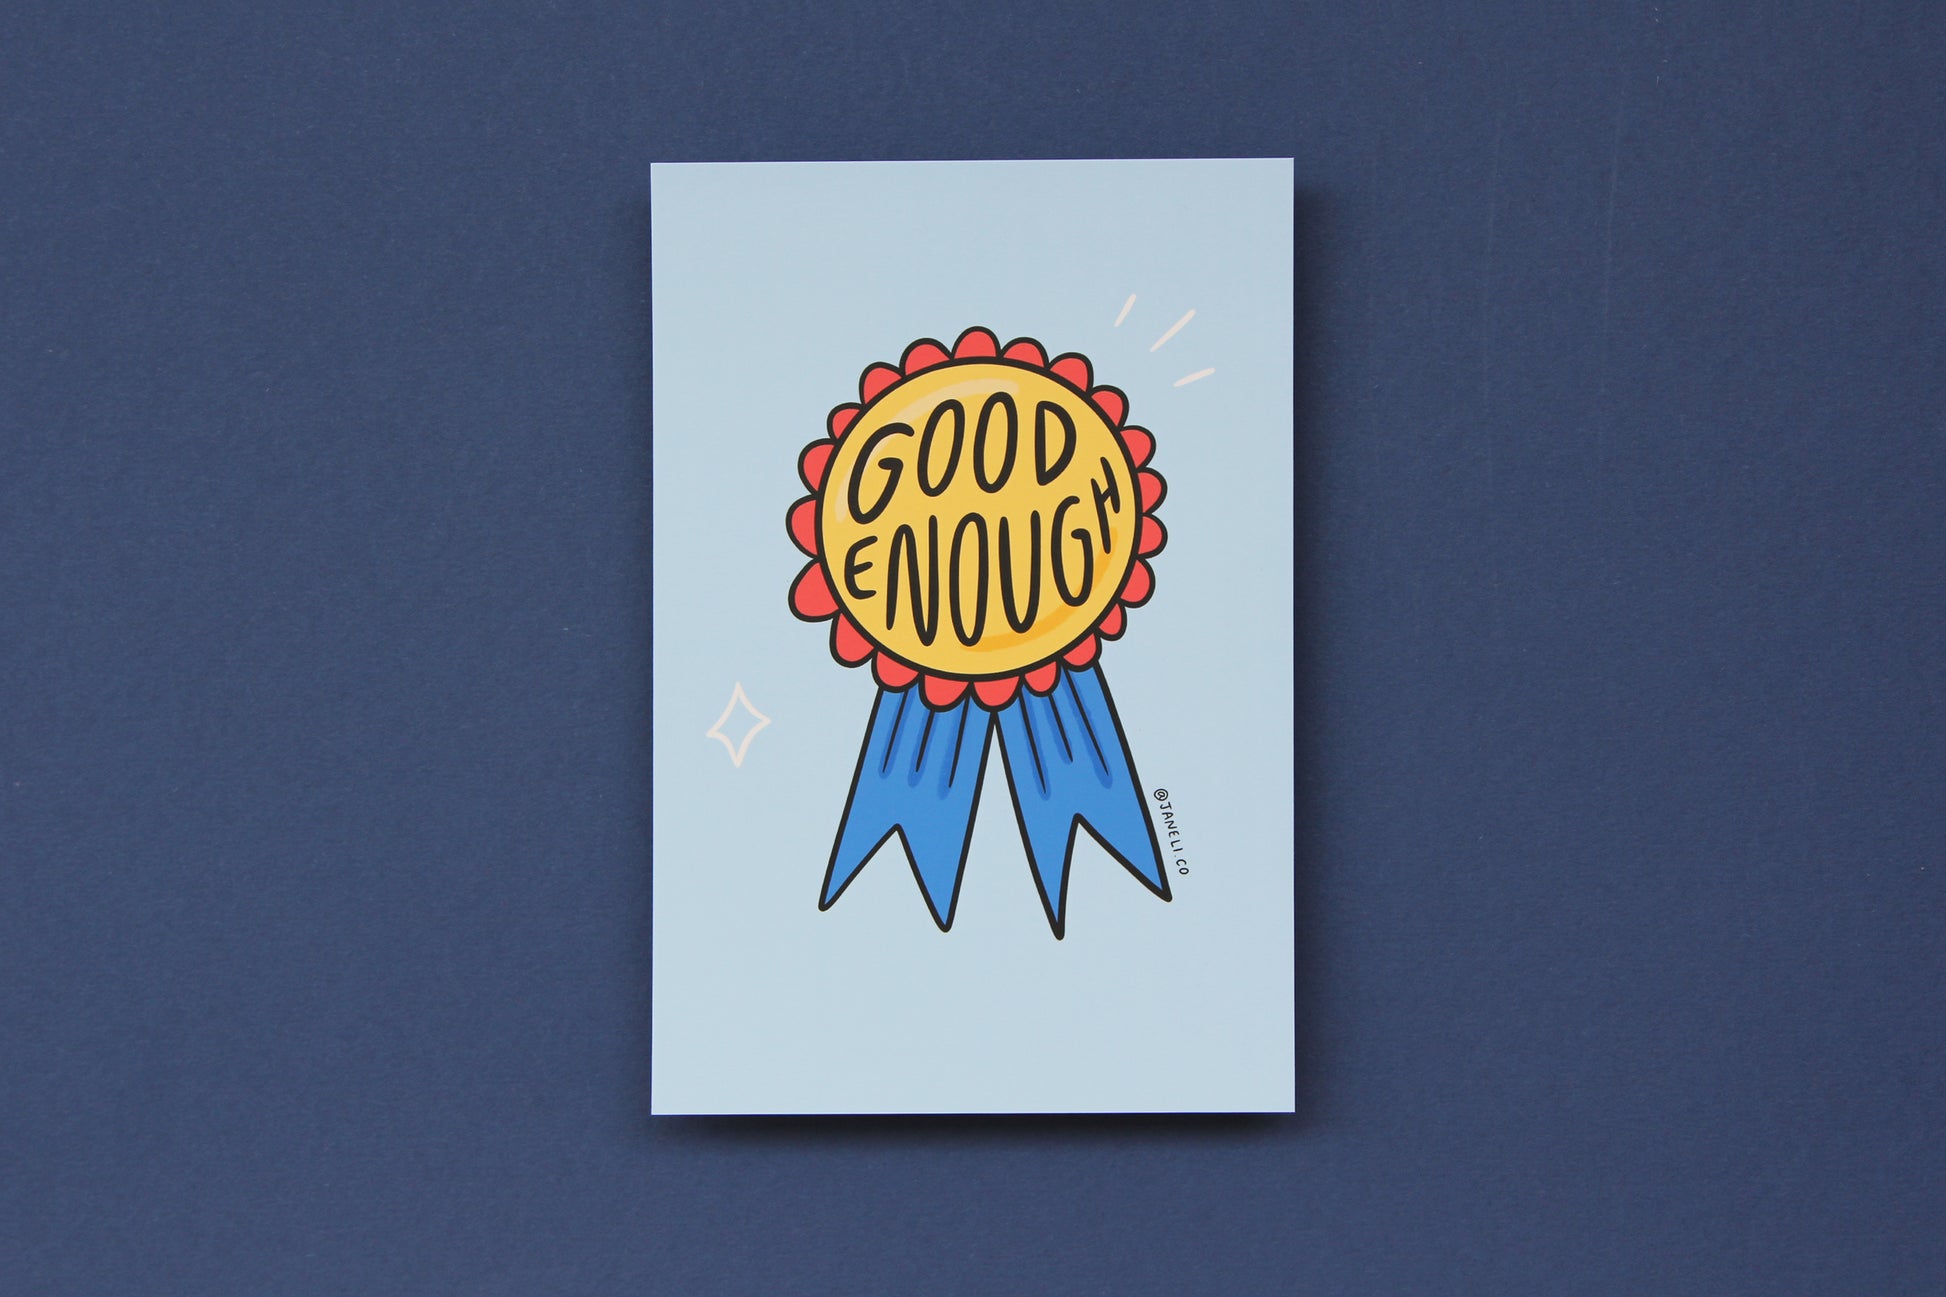 A JaneLi.Co mini print/postcard of an award ribbon that says "Good Enough" over a blue background.